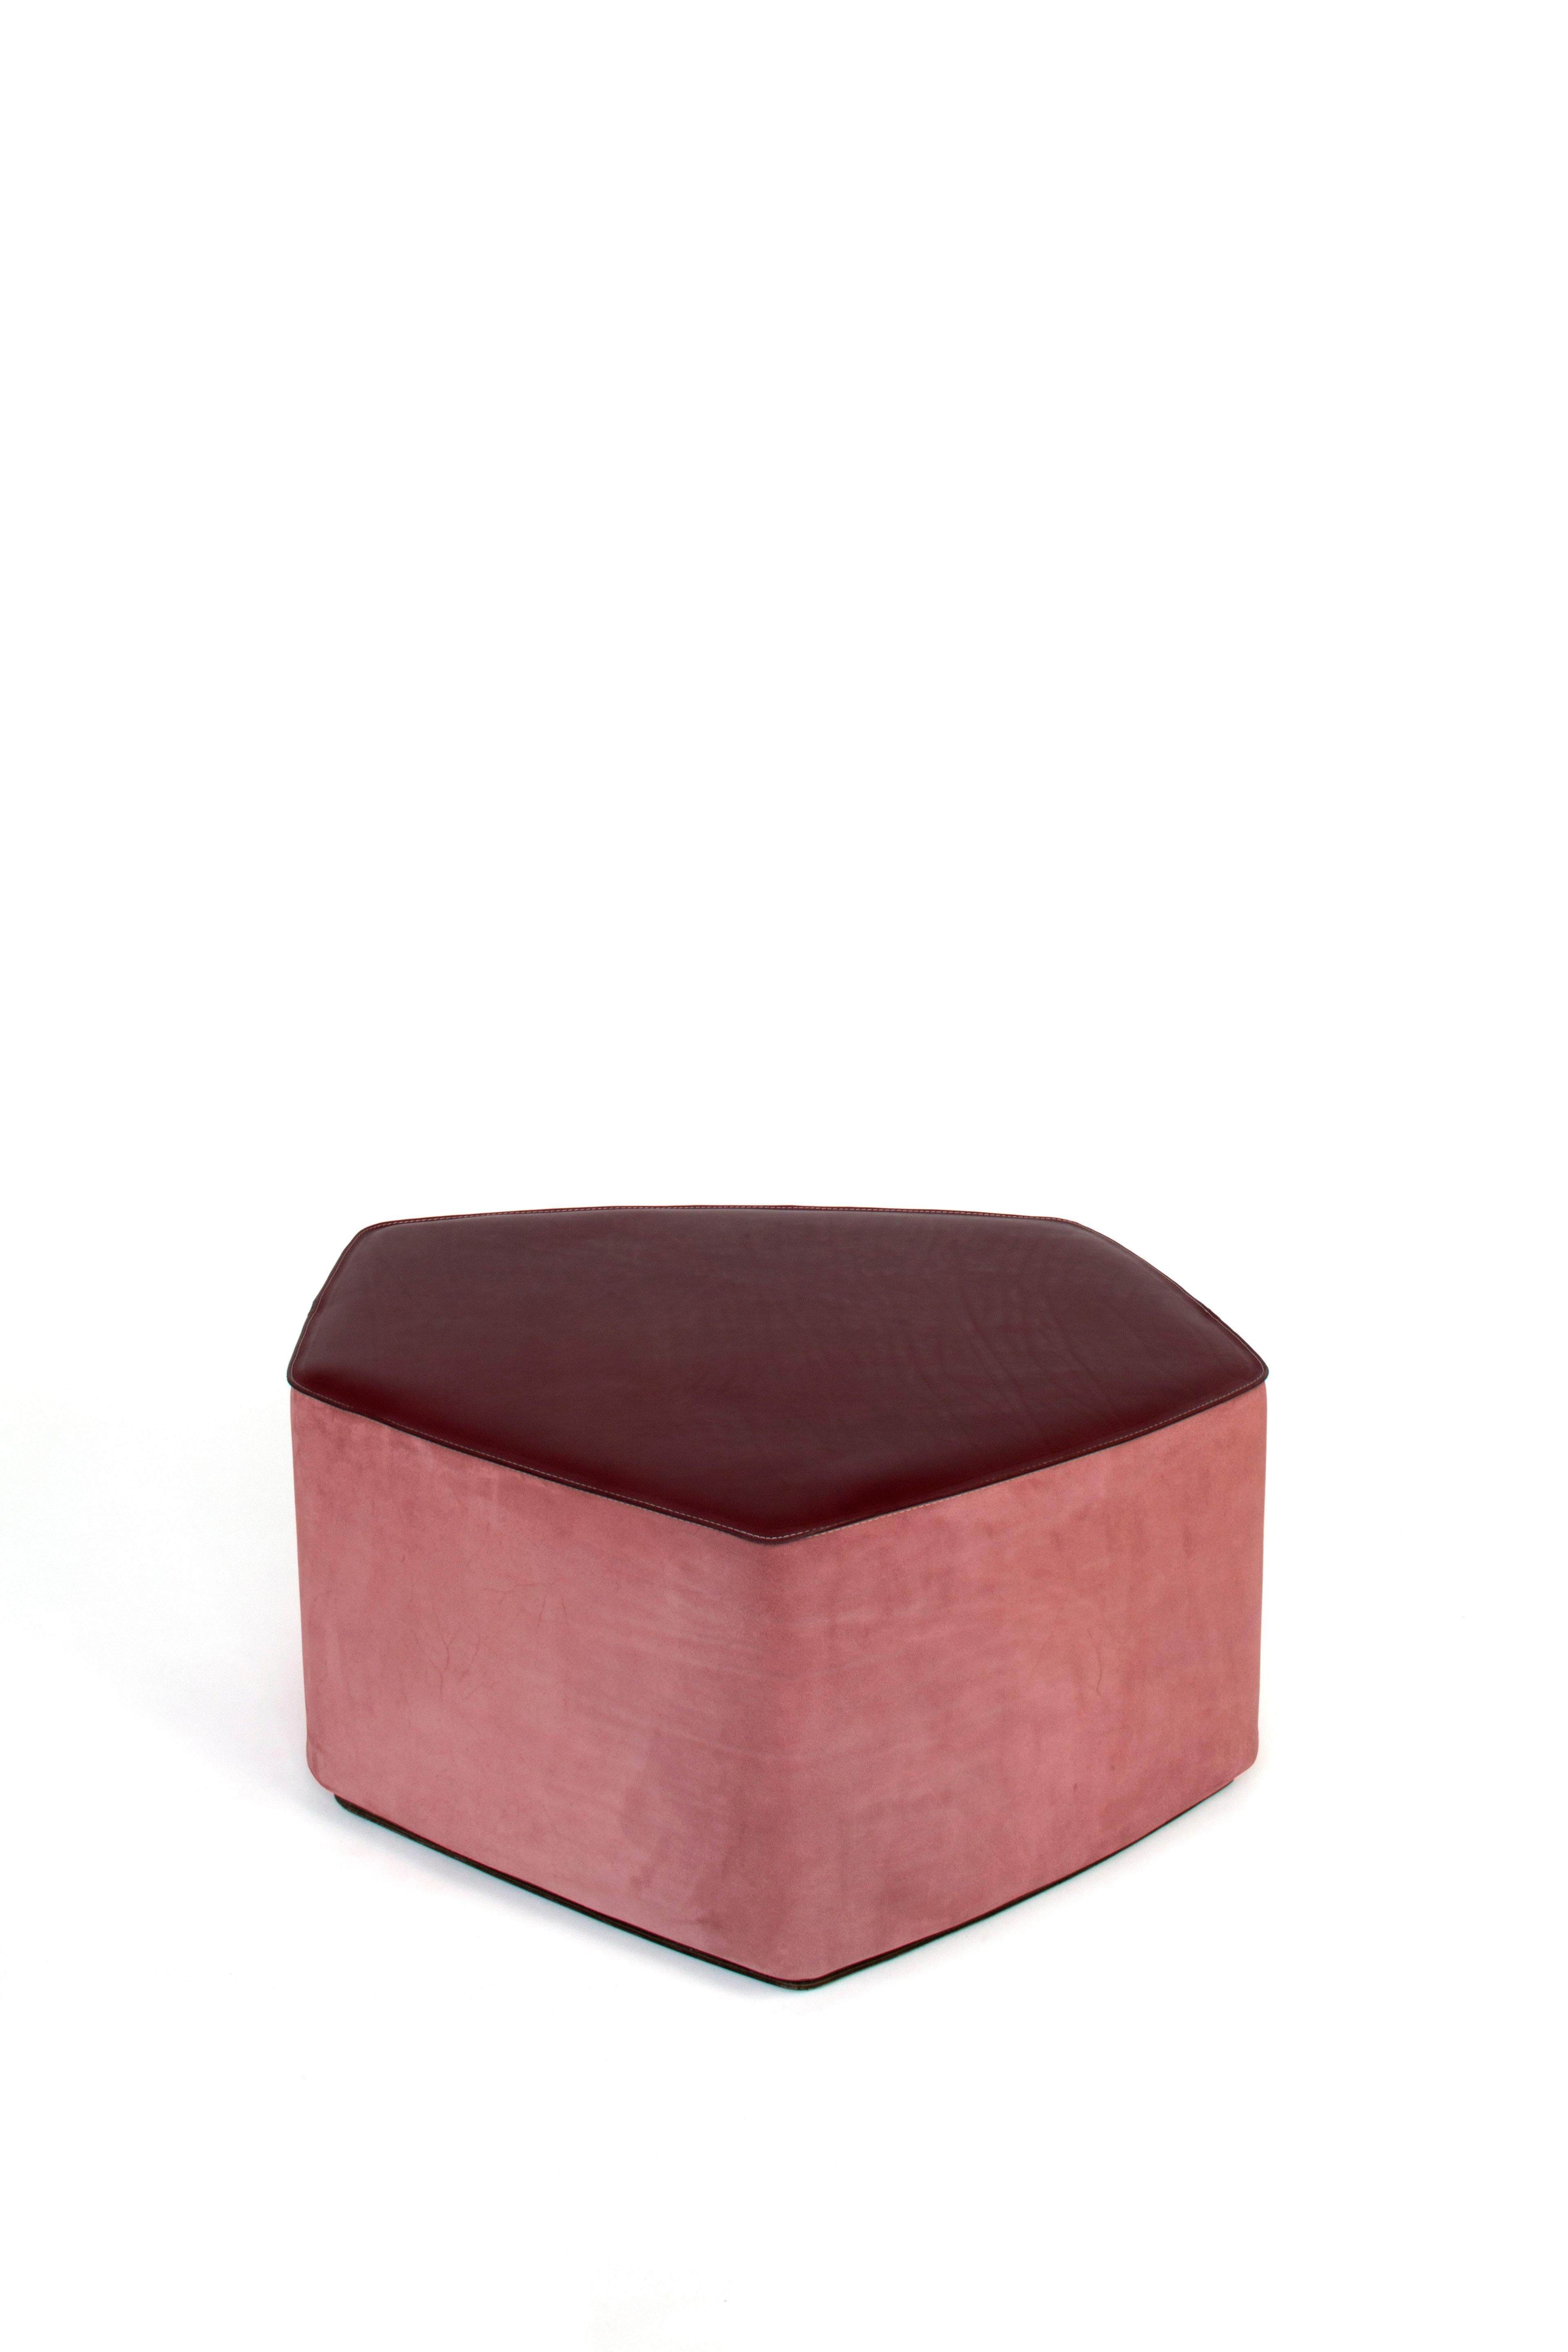 Medium pouf! leather stool by Nestor Perkal
Dimensions: W 83 x D 75.5 x H 35 cm
Materials: Leather, poplar plywood, suede.
Available in other colors and in 3 sizes.

The POUF! collection is made up of three seats made of leather and suede. They